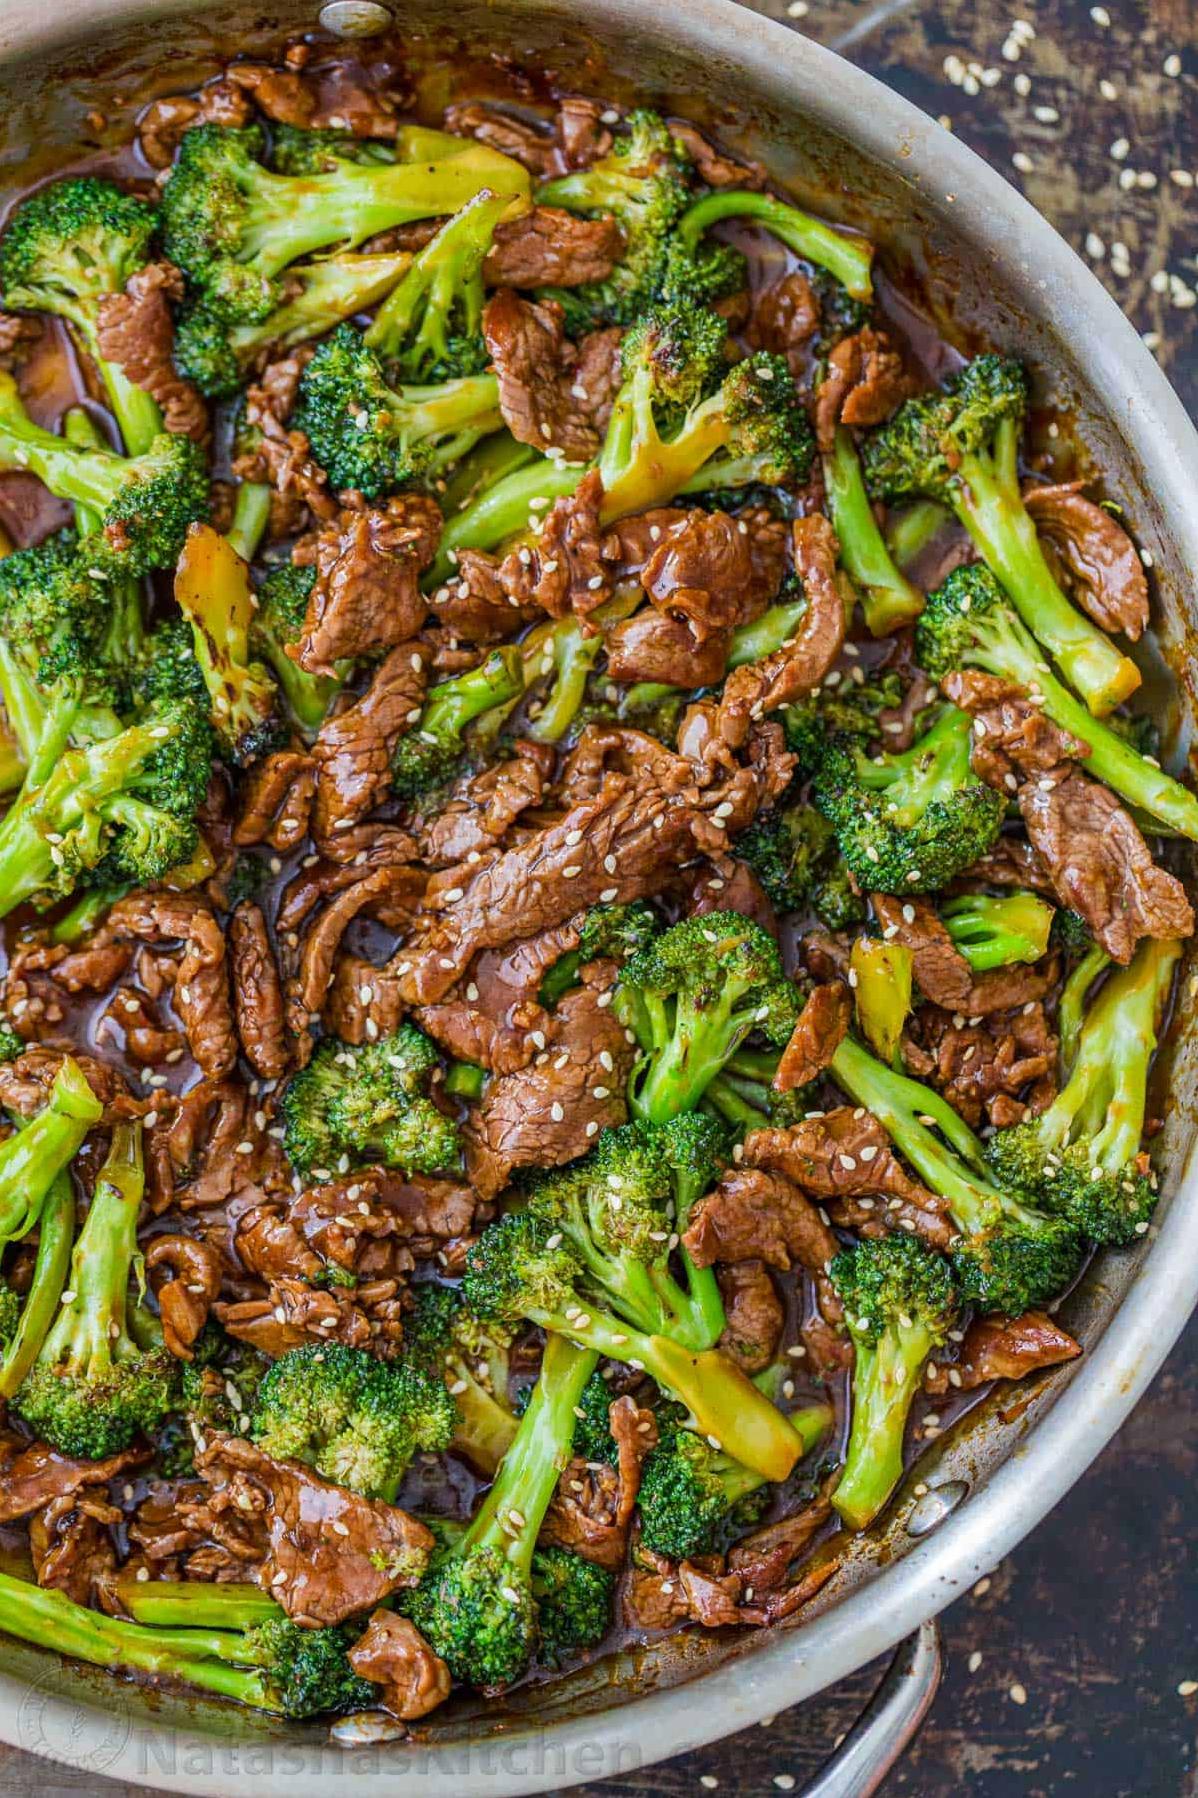  Beef and Broccoli in a Savory Wine Sauce, where taste buds meet.